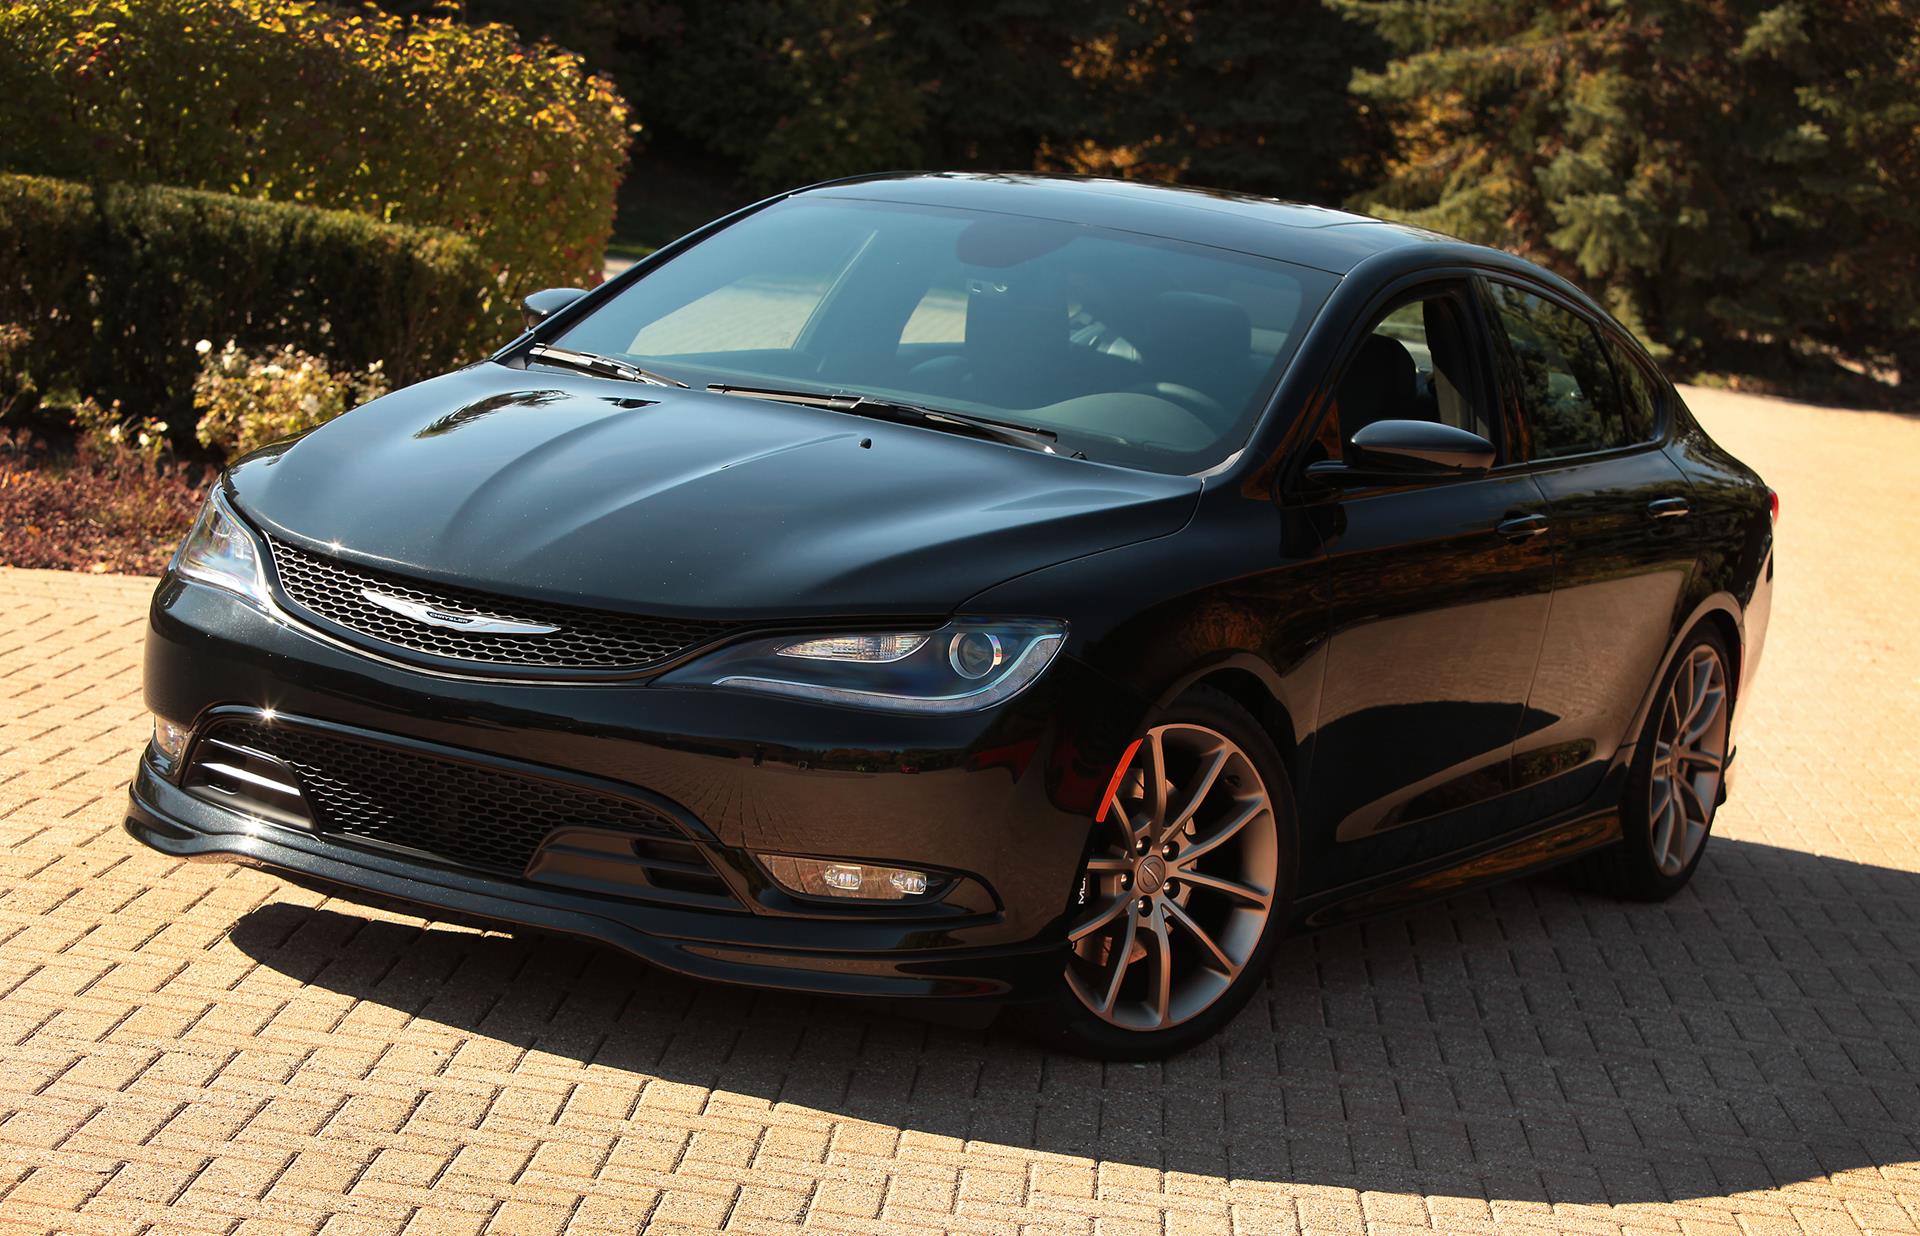 2014 Chrysler 200S Mopar News and Information, Research, and Pricing